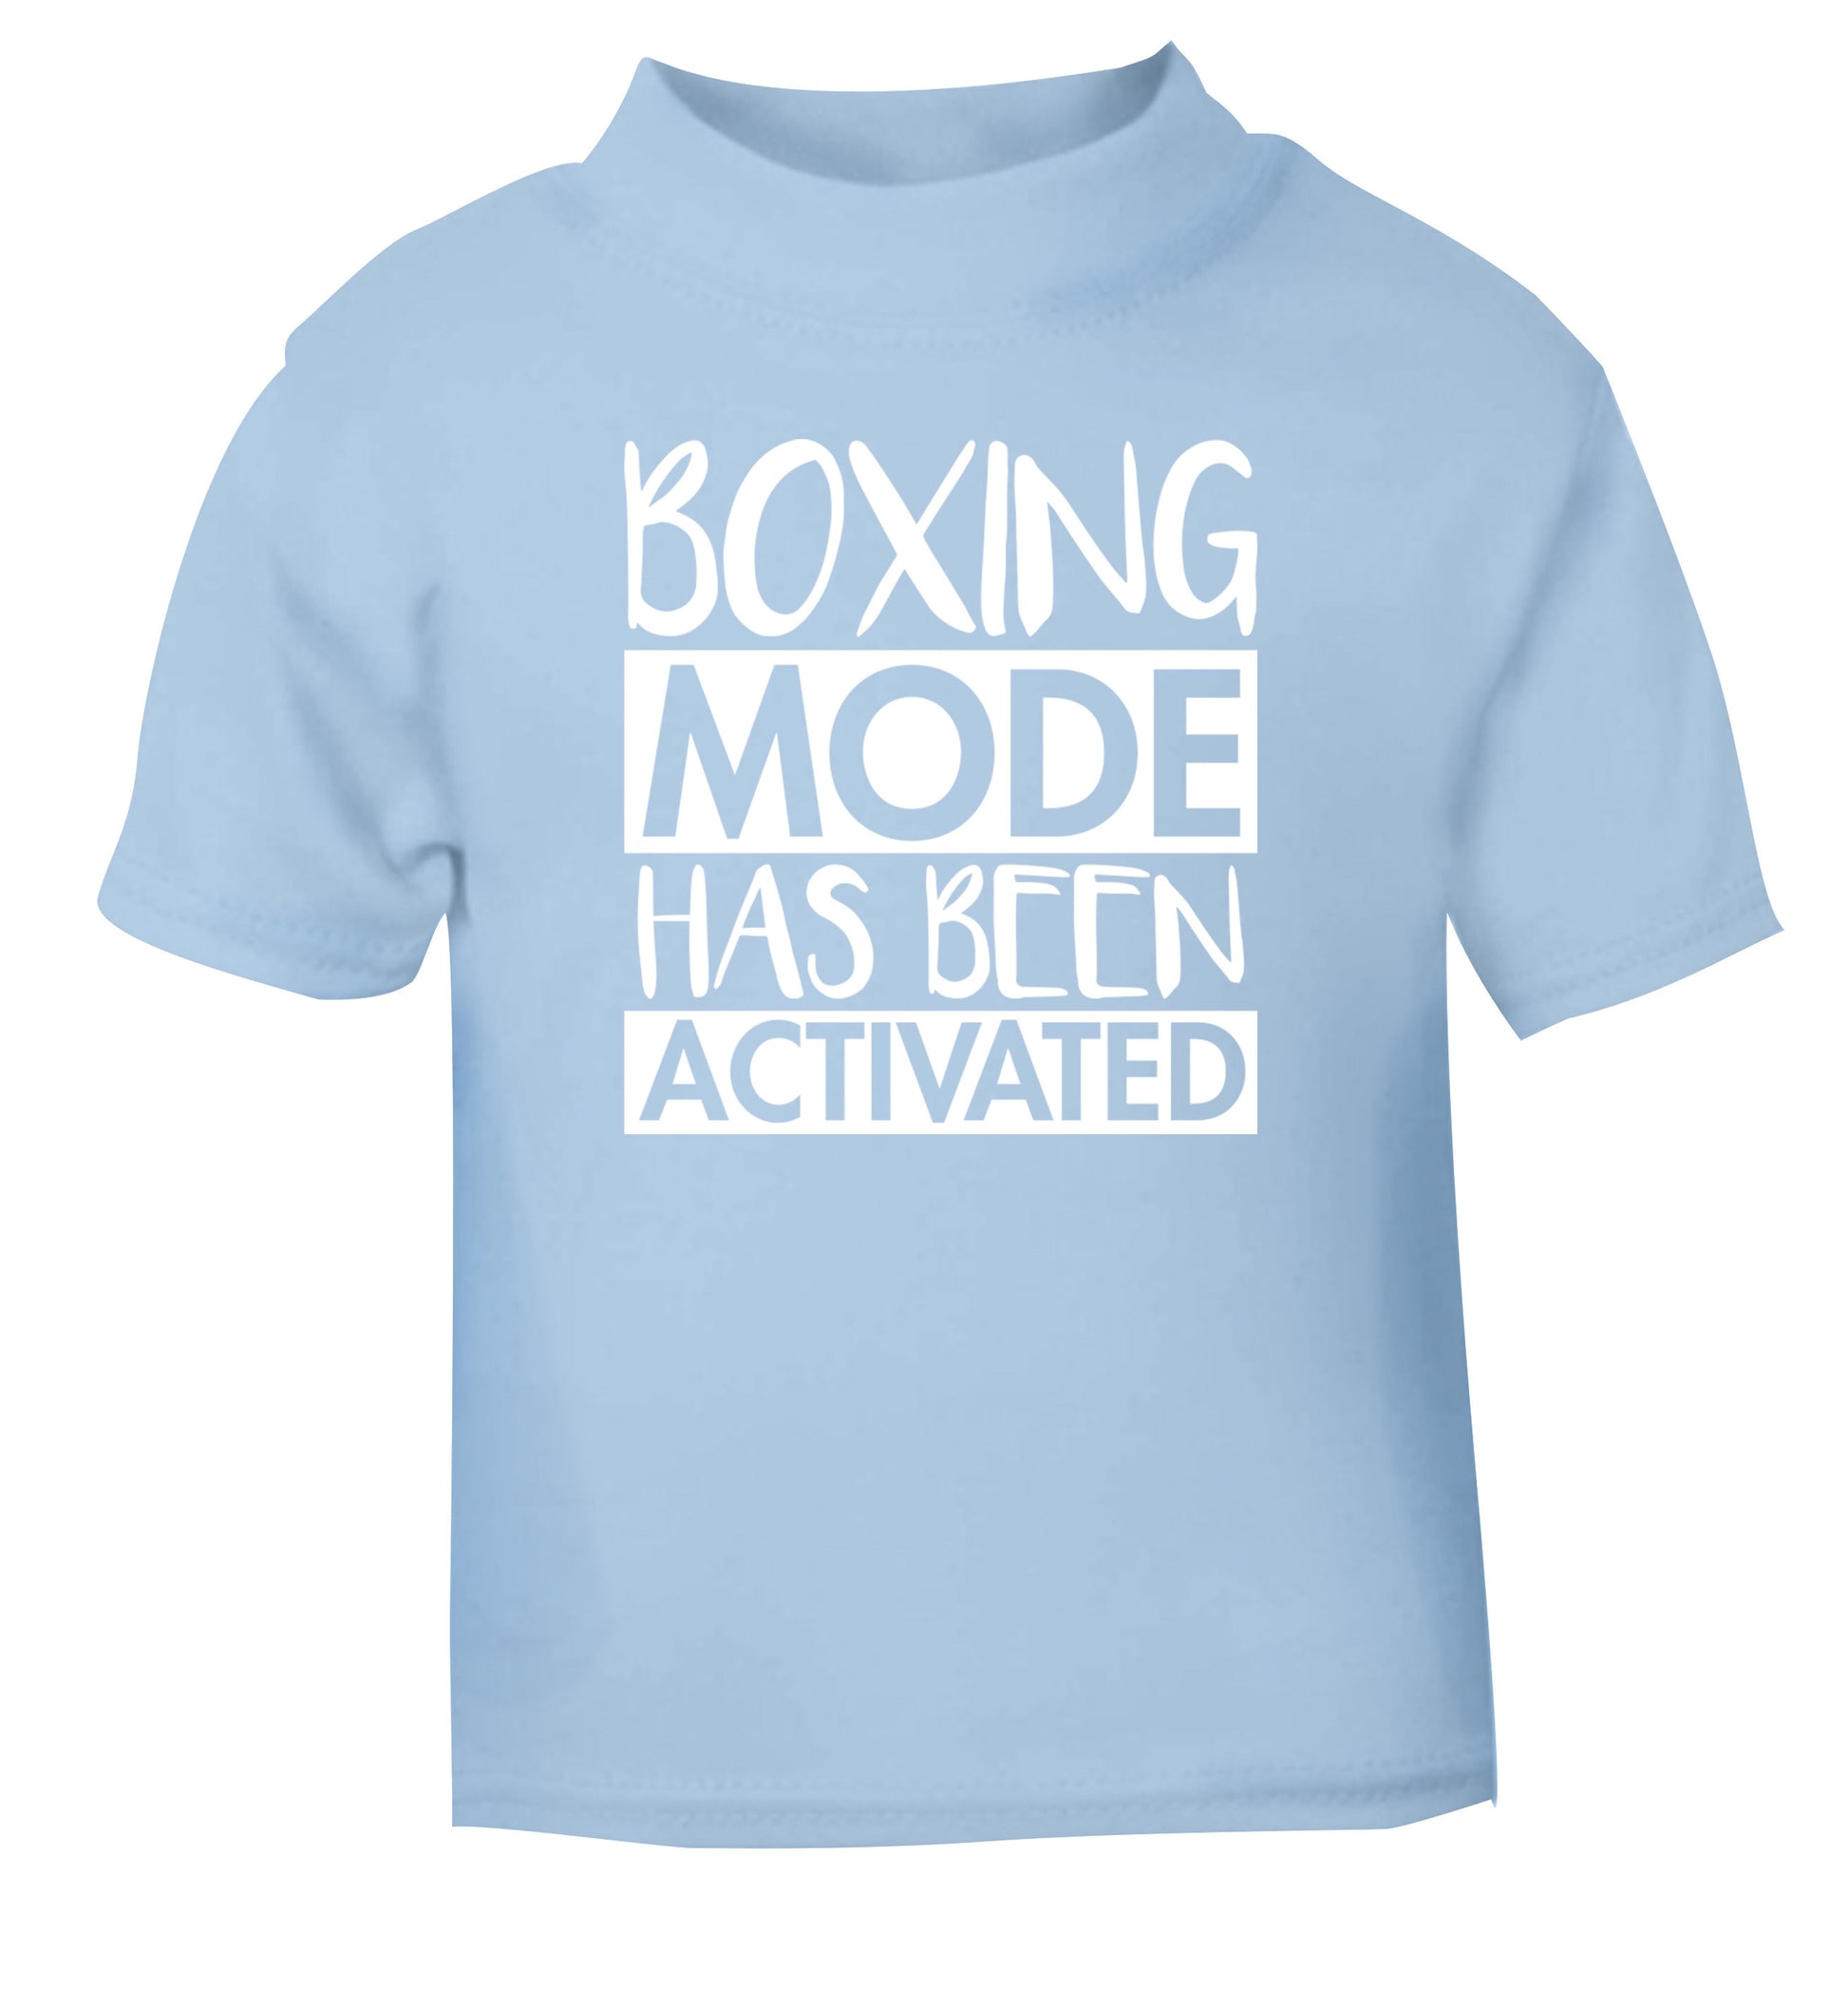 Boxing mode activated light blue Baby Toddler Tshirt 2 Years